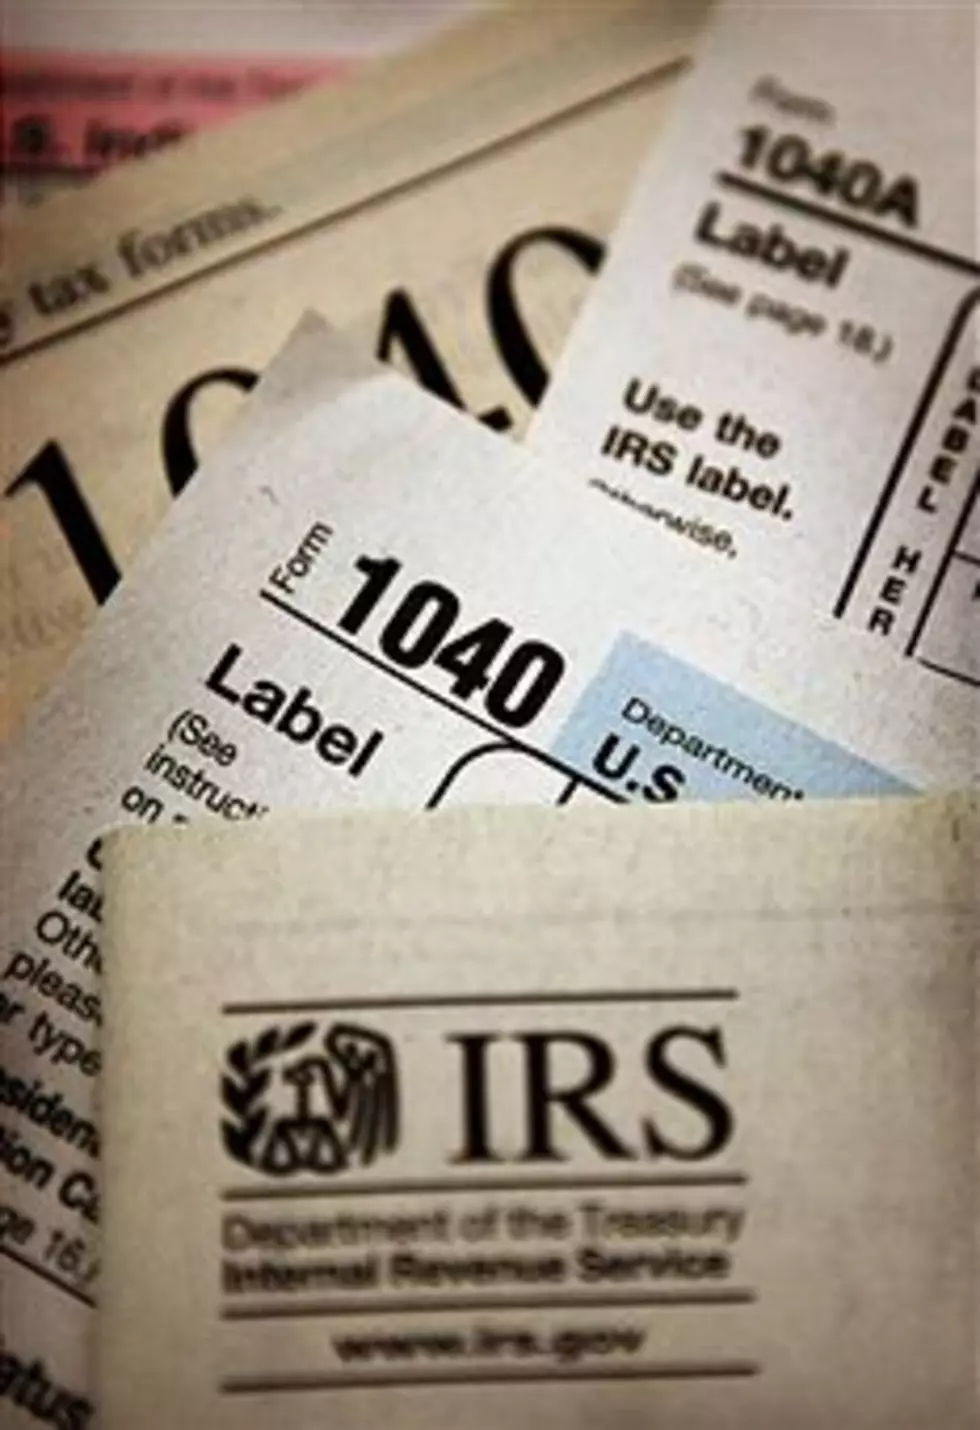 IRS Agent Cheated On Taxes